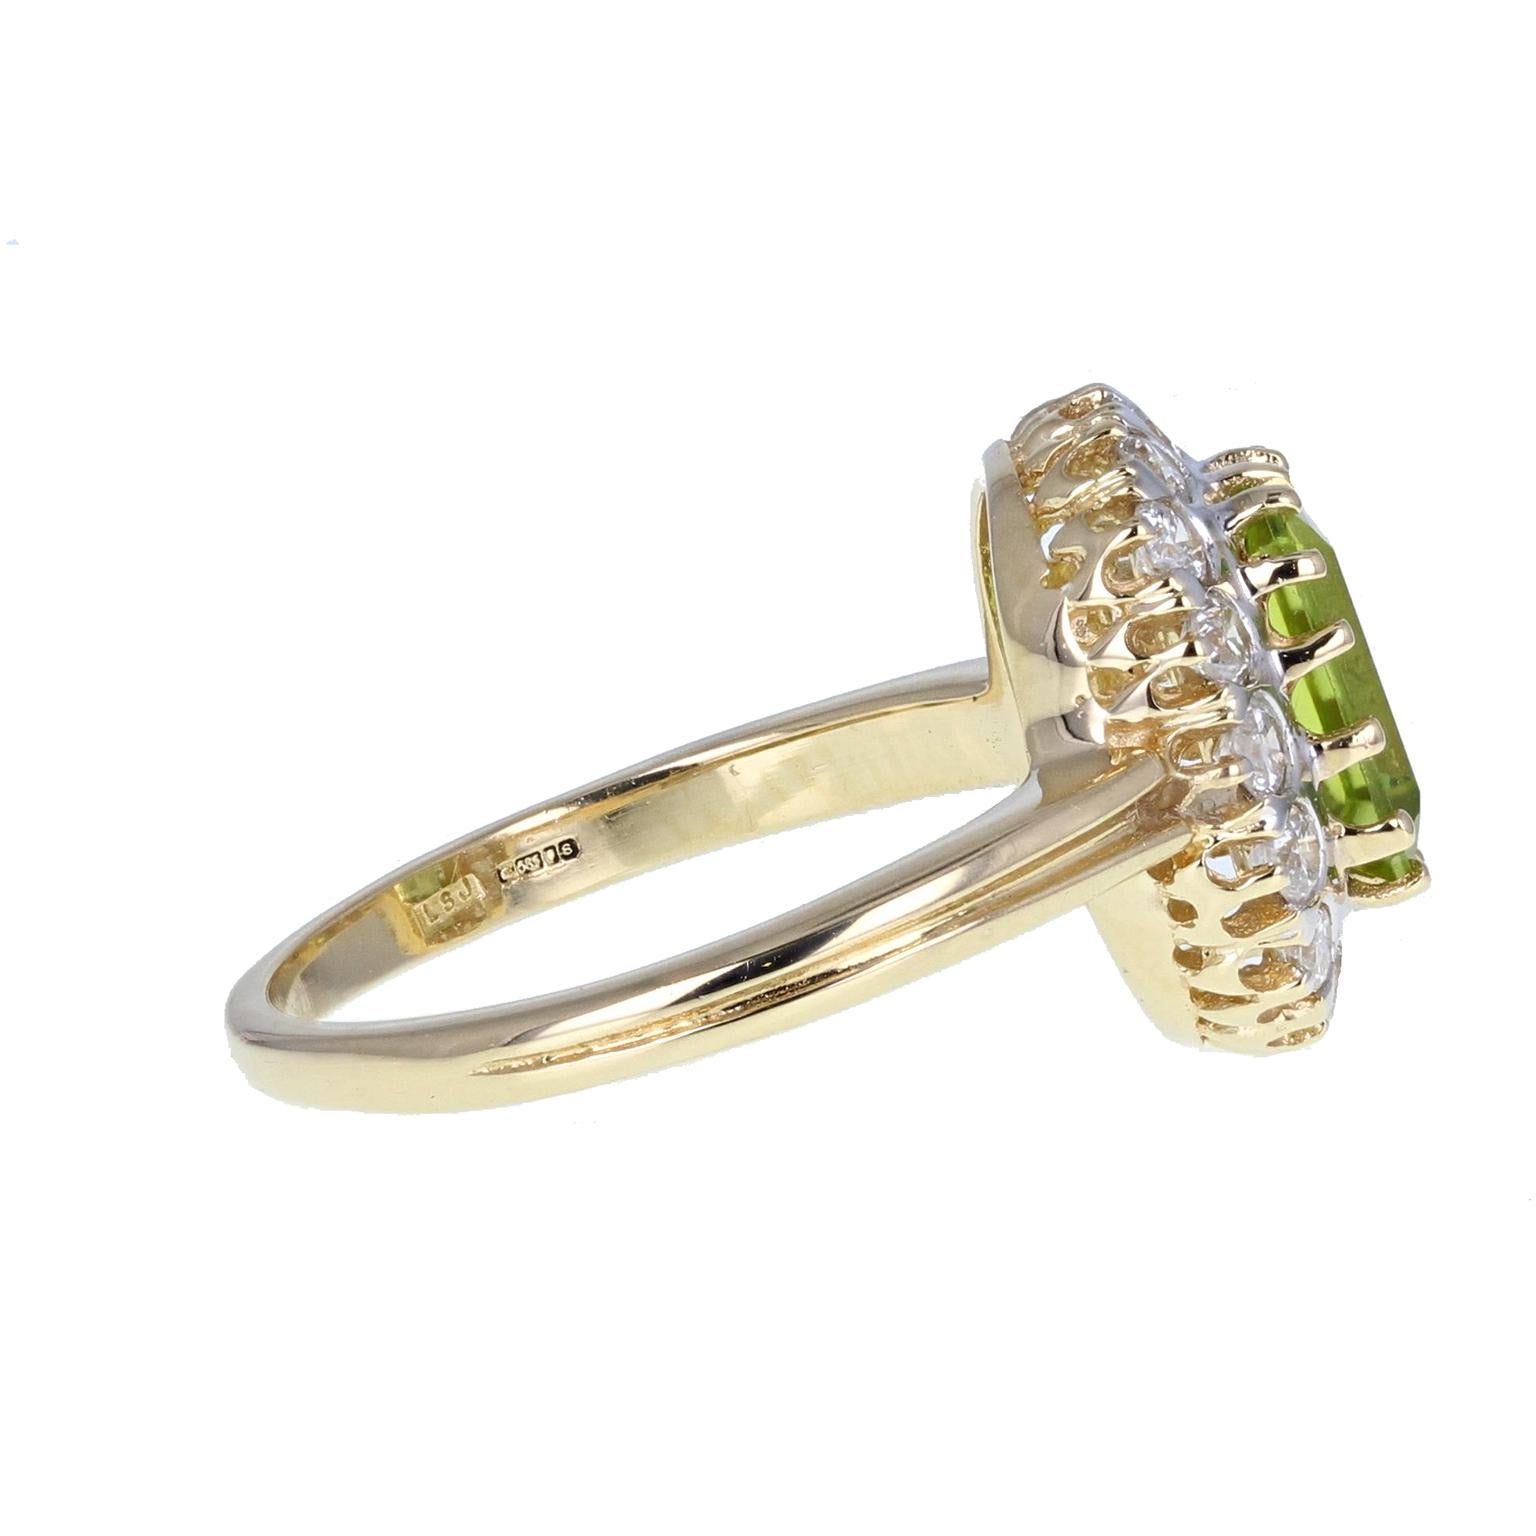 Vintage 14 Carat Gold Peridot Diamond Cluster Cocktail Engagement Ring In Excellent Condition For Sale In Newcastle Upon Tyne, GB